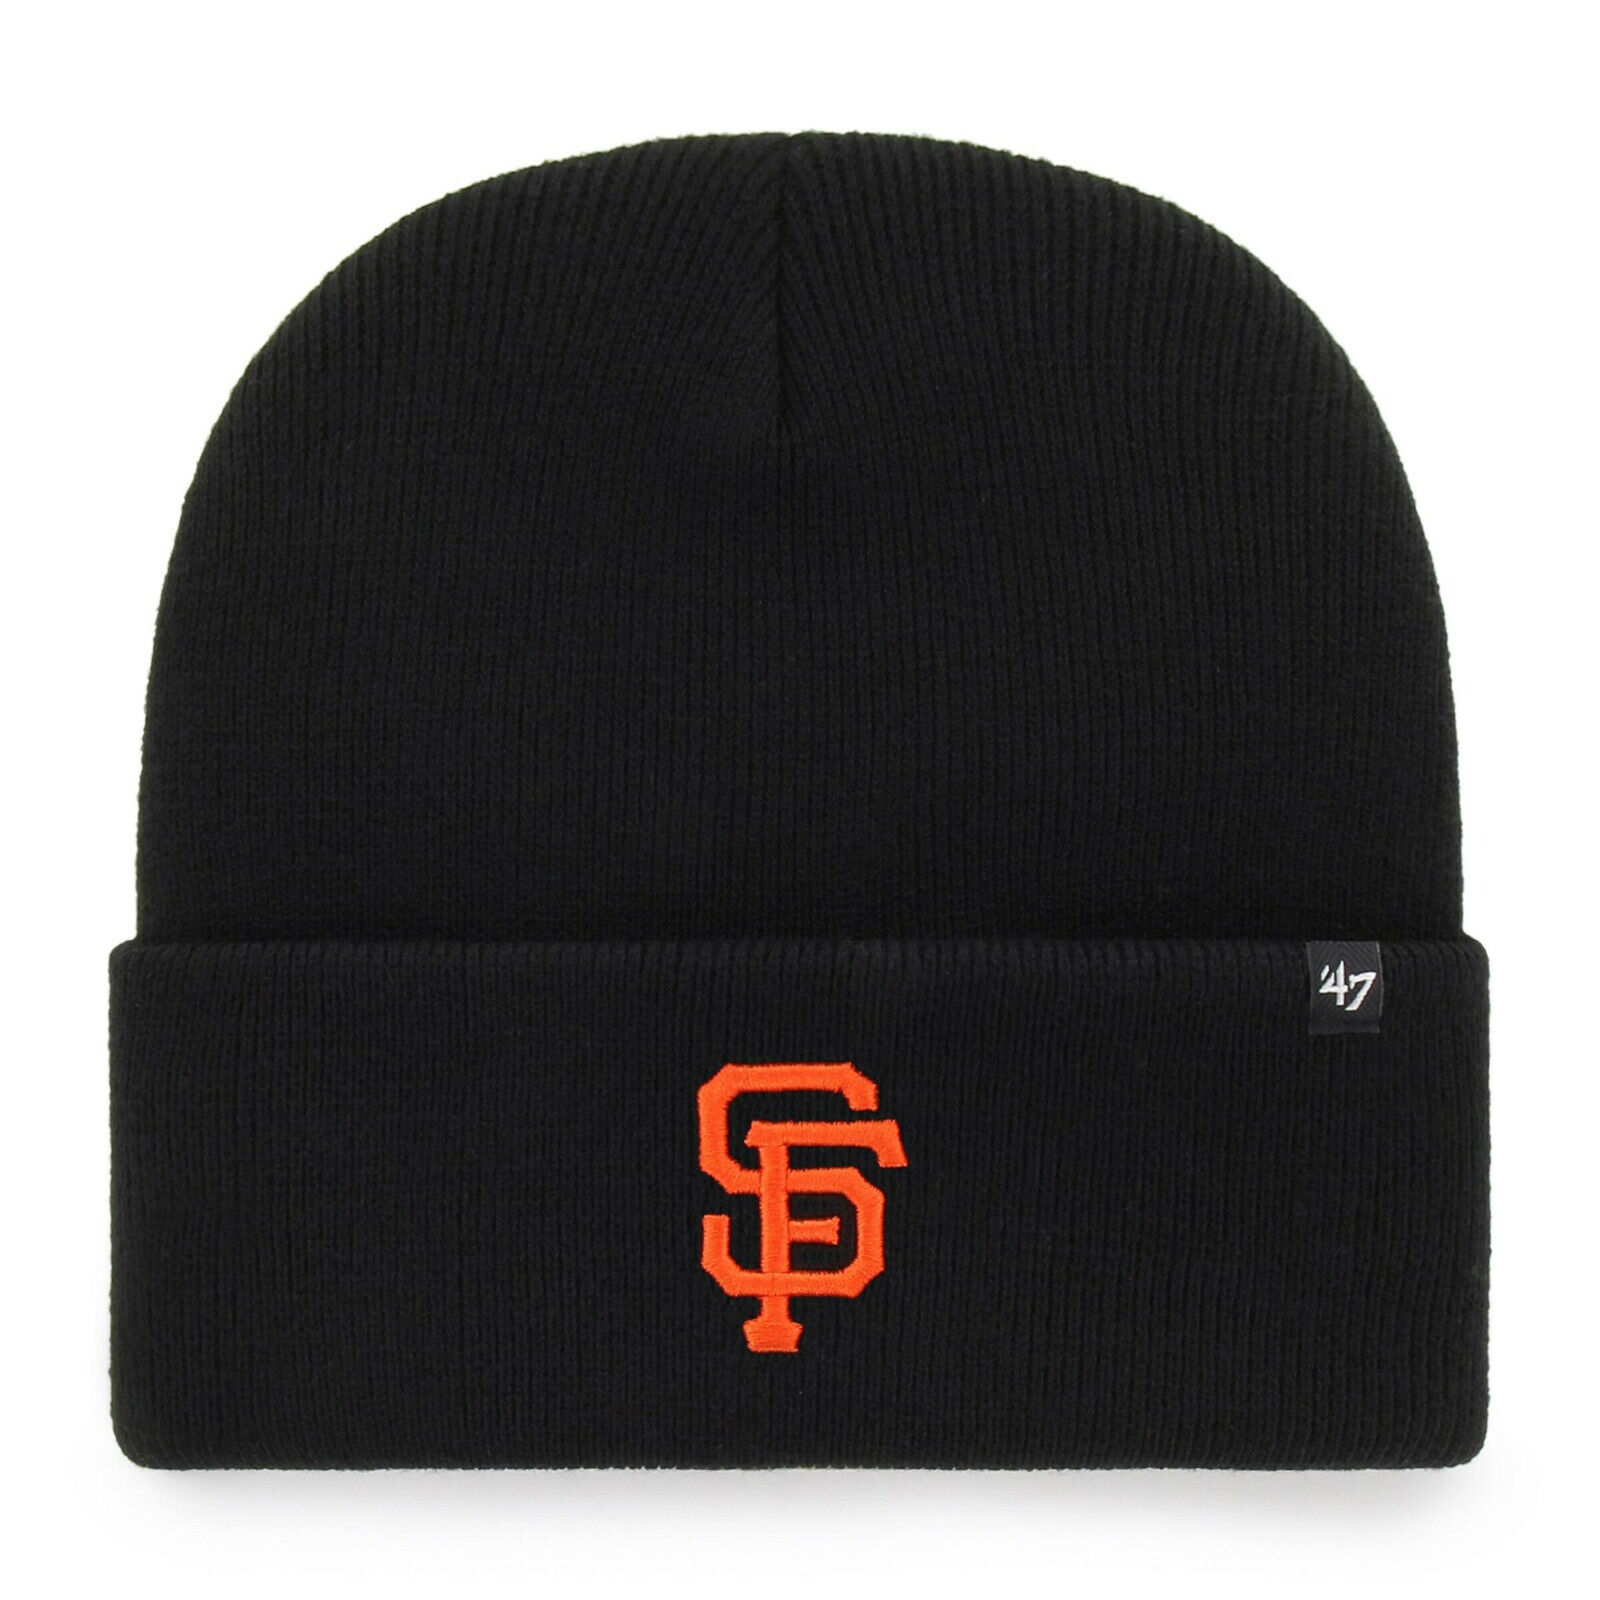 MLB Credence San Francisco Giants Woolly Haymaker Max 83% OFF Cuff Knit Black Hat